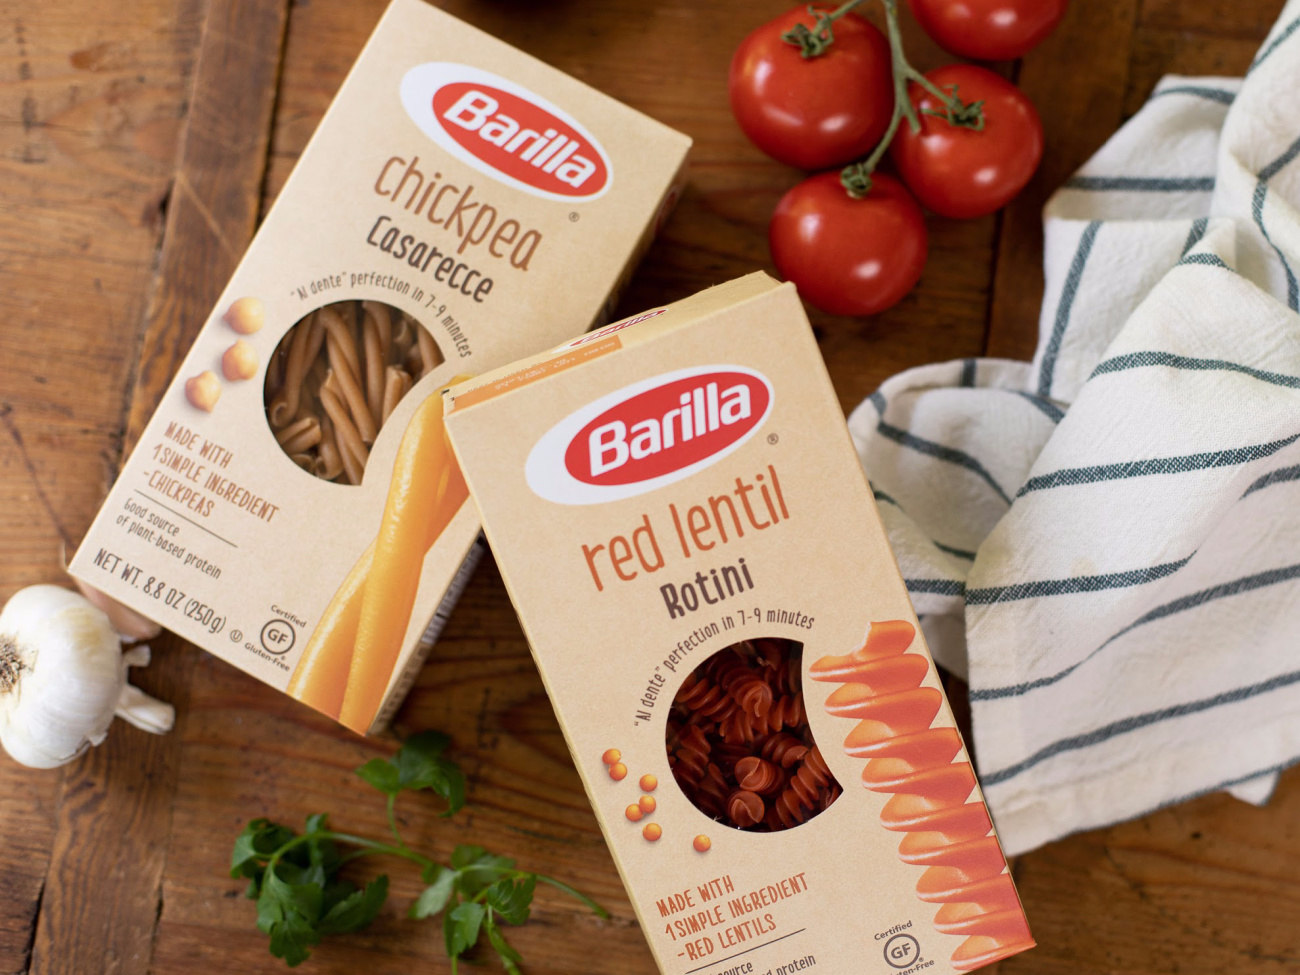 Barilla Red Lentil or Chickpea Pasta As Low As 9¢ At Kroger With New Coupon